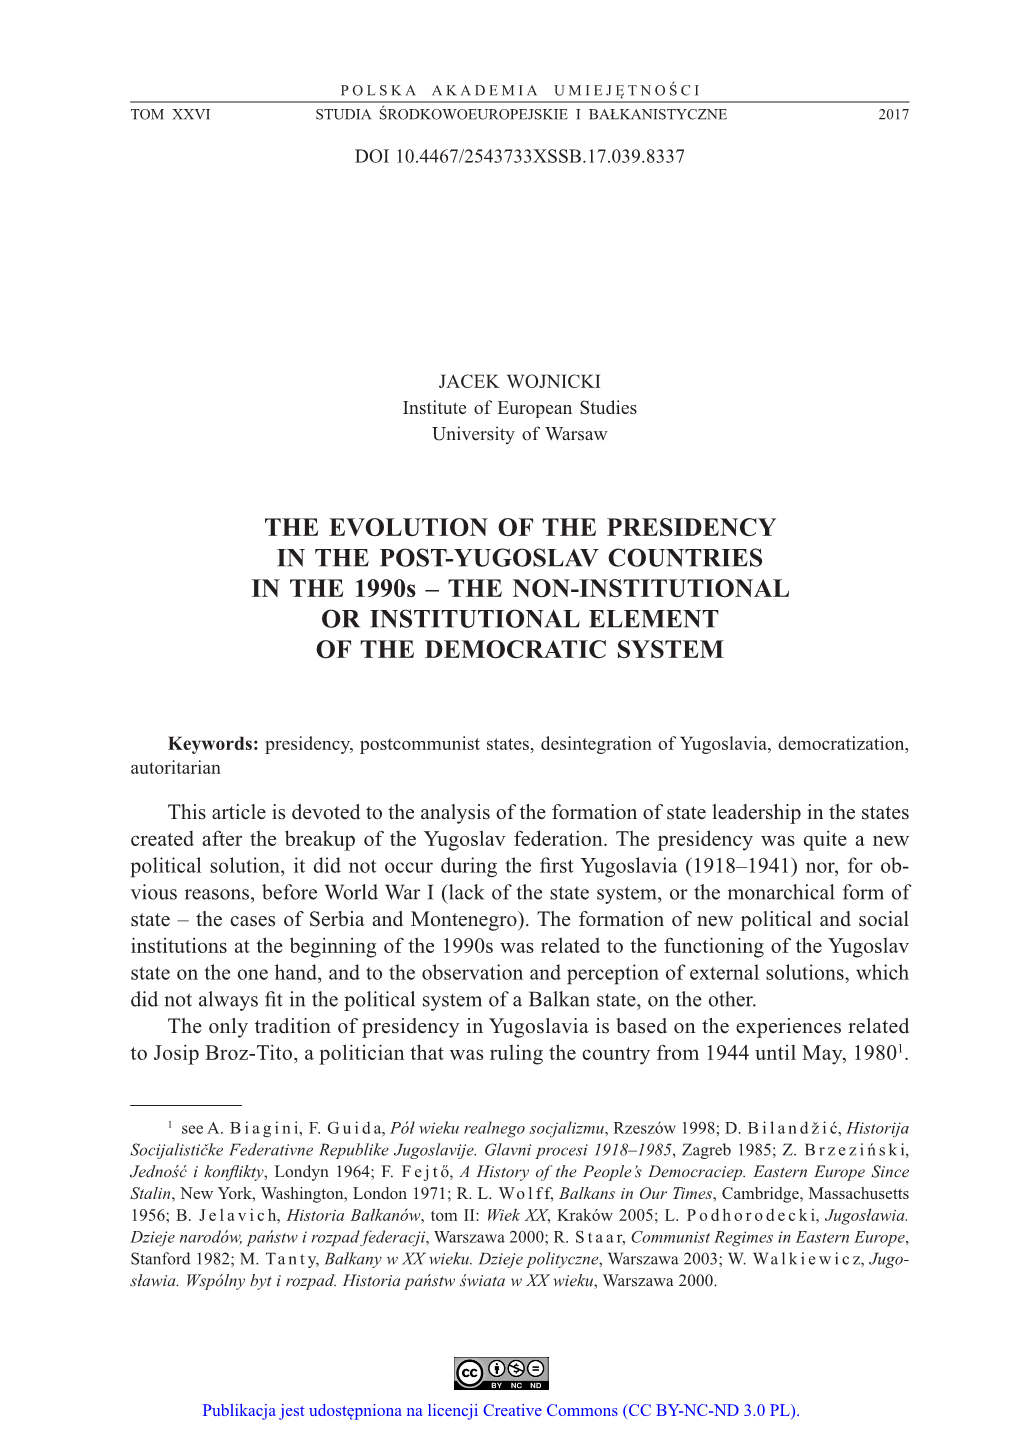 THE EVOLUTION of the PRESIDENCY in the POST-YUGOSLAV COUNTRIES in the 1990S – the NON-INSTITUTIONAL OR INSTITUTIONAL ELEMENT of the DEMOCRATIC SYSTEM